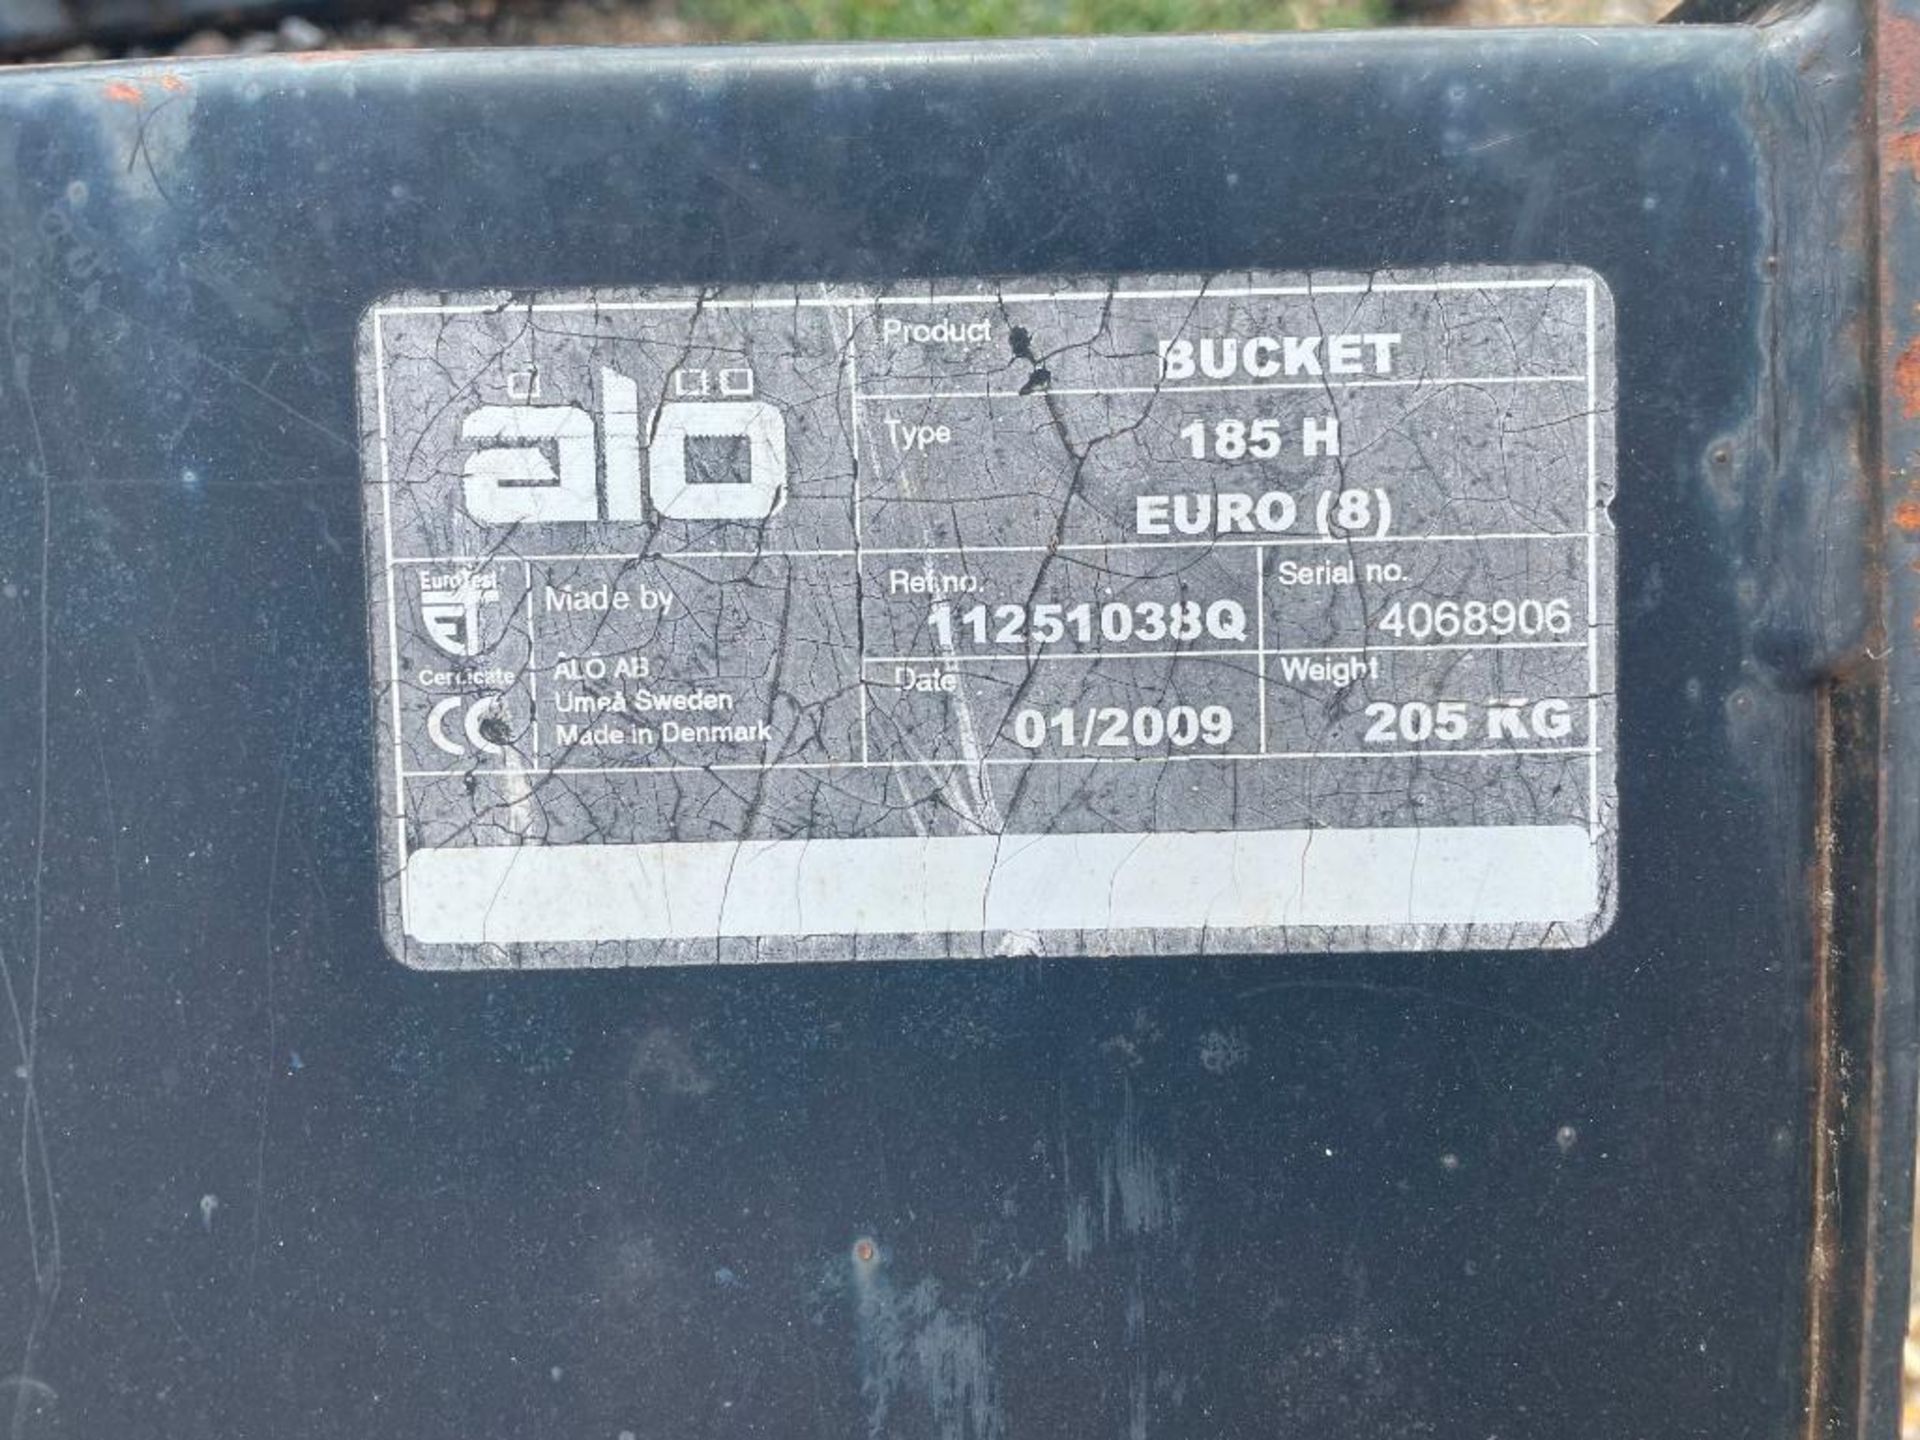 2009 ALO 185H general purpose bucket with Euro 8 attachments. Serial No: 4068906 - Image 3 of 5